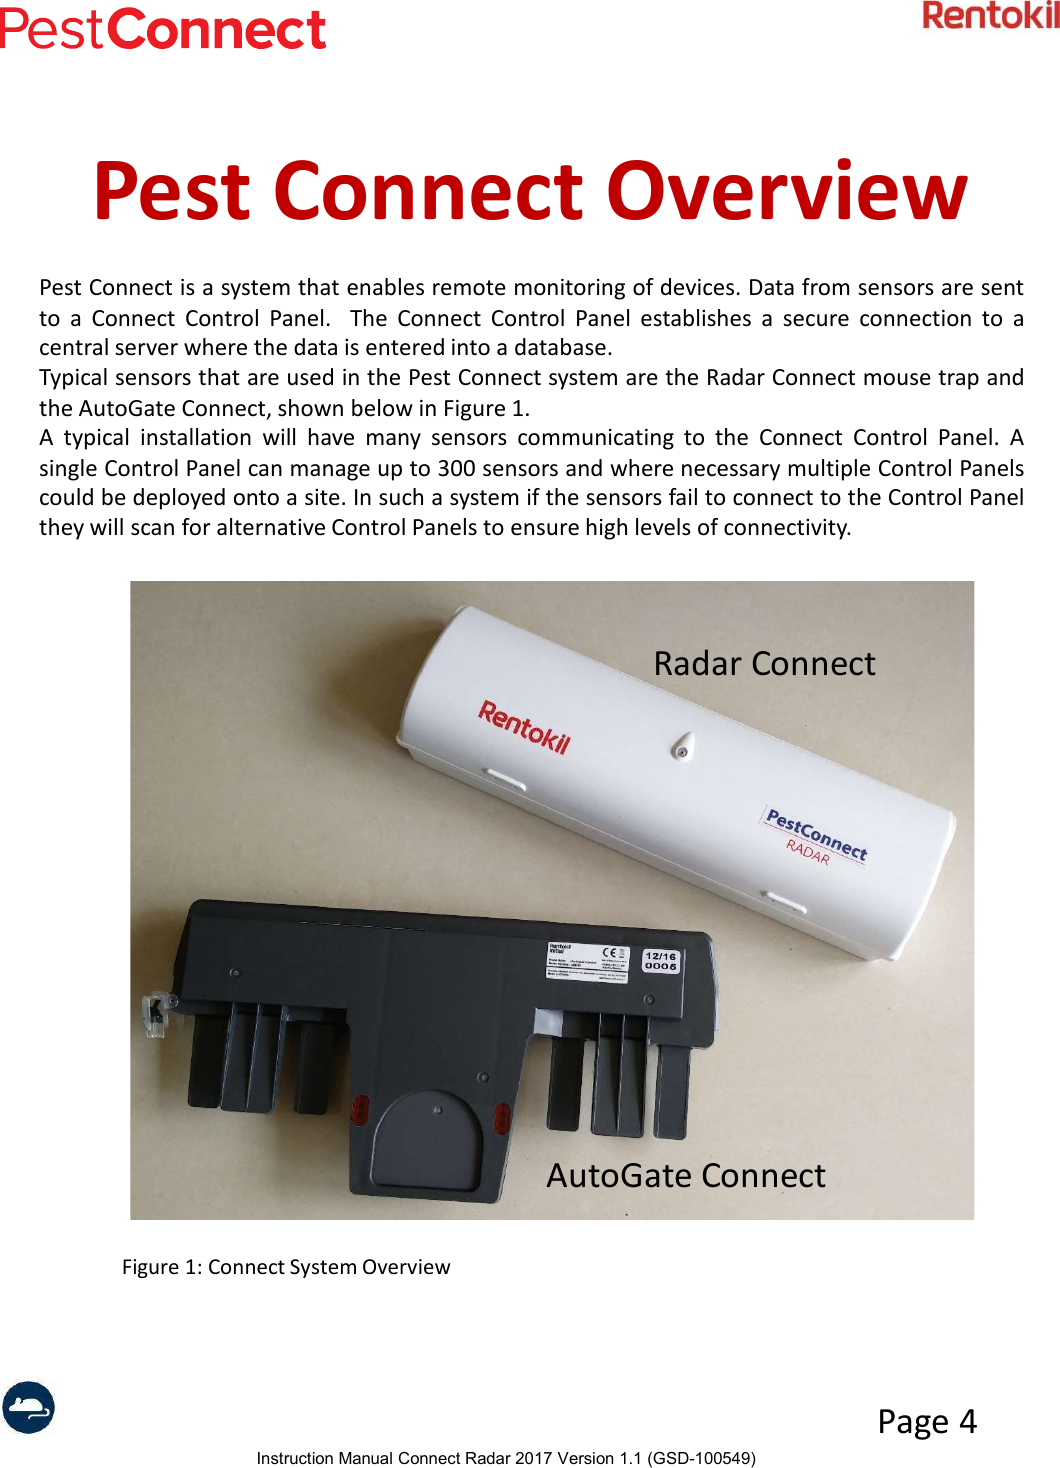 Instruction Manual Connect Radar 2017 Version 1.1 (GSD-100549)Page 4Pest Connect OverviewPest Connect is a system that enables remote monitoring of devices. Data from sensors are sentto a Connect Control Panel. The Connect Control Panel establishes a secure connection to acentral server where the data is entered into a database.Typical sensors that are used in the Pest Connect system are the Radar Connect mouse trap andthe AutoGate Connect, shown below in Figure 1.A typical installation will have many sensors communicating to the Connect Control Panel. Asingle Control Panel can manage up to 300 sensors and where necessary multiple Control Panelscould be deployed onto a site. In such a system if the sensors fail to connect to the Control Panelthey will scan for alternative Control Panels to ensure high levels of connectivity.Figure 1: Connect System OverviewRadar ConnectAutoGate Connect